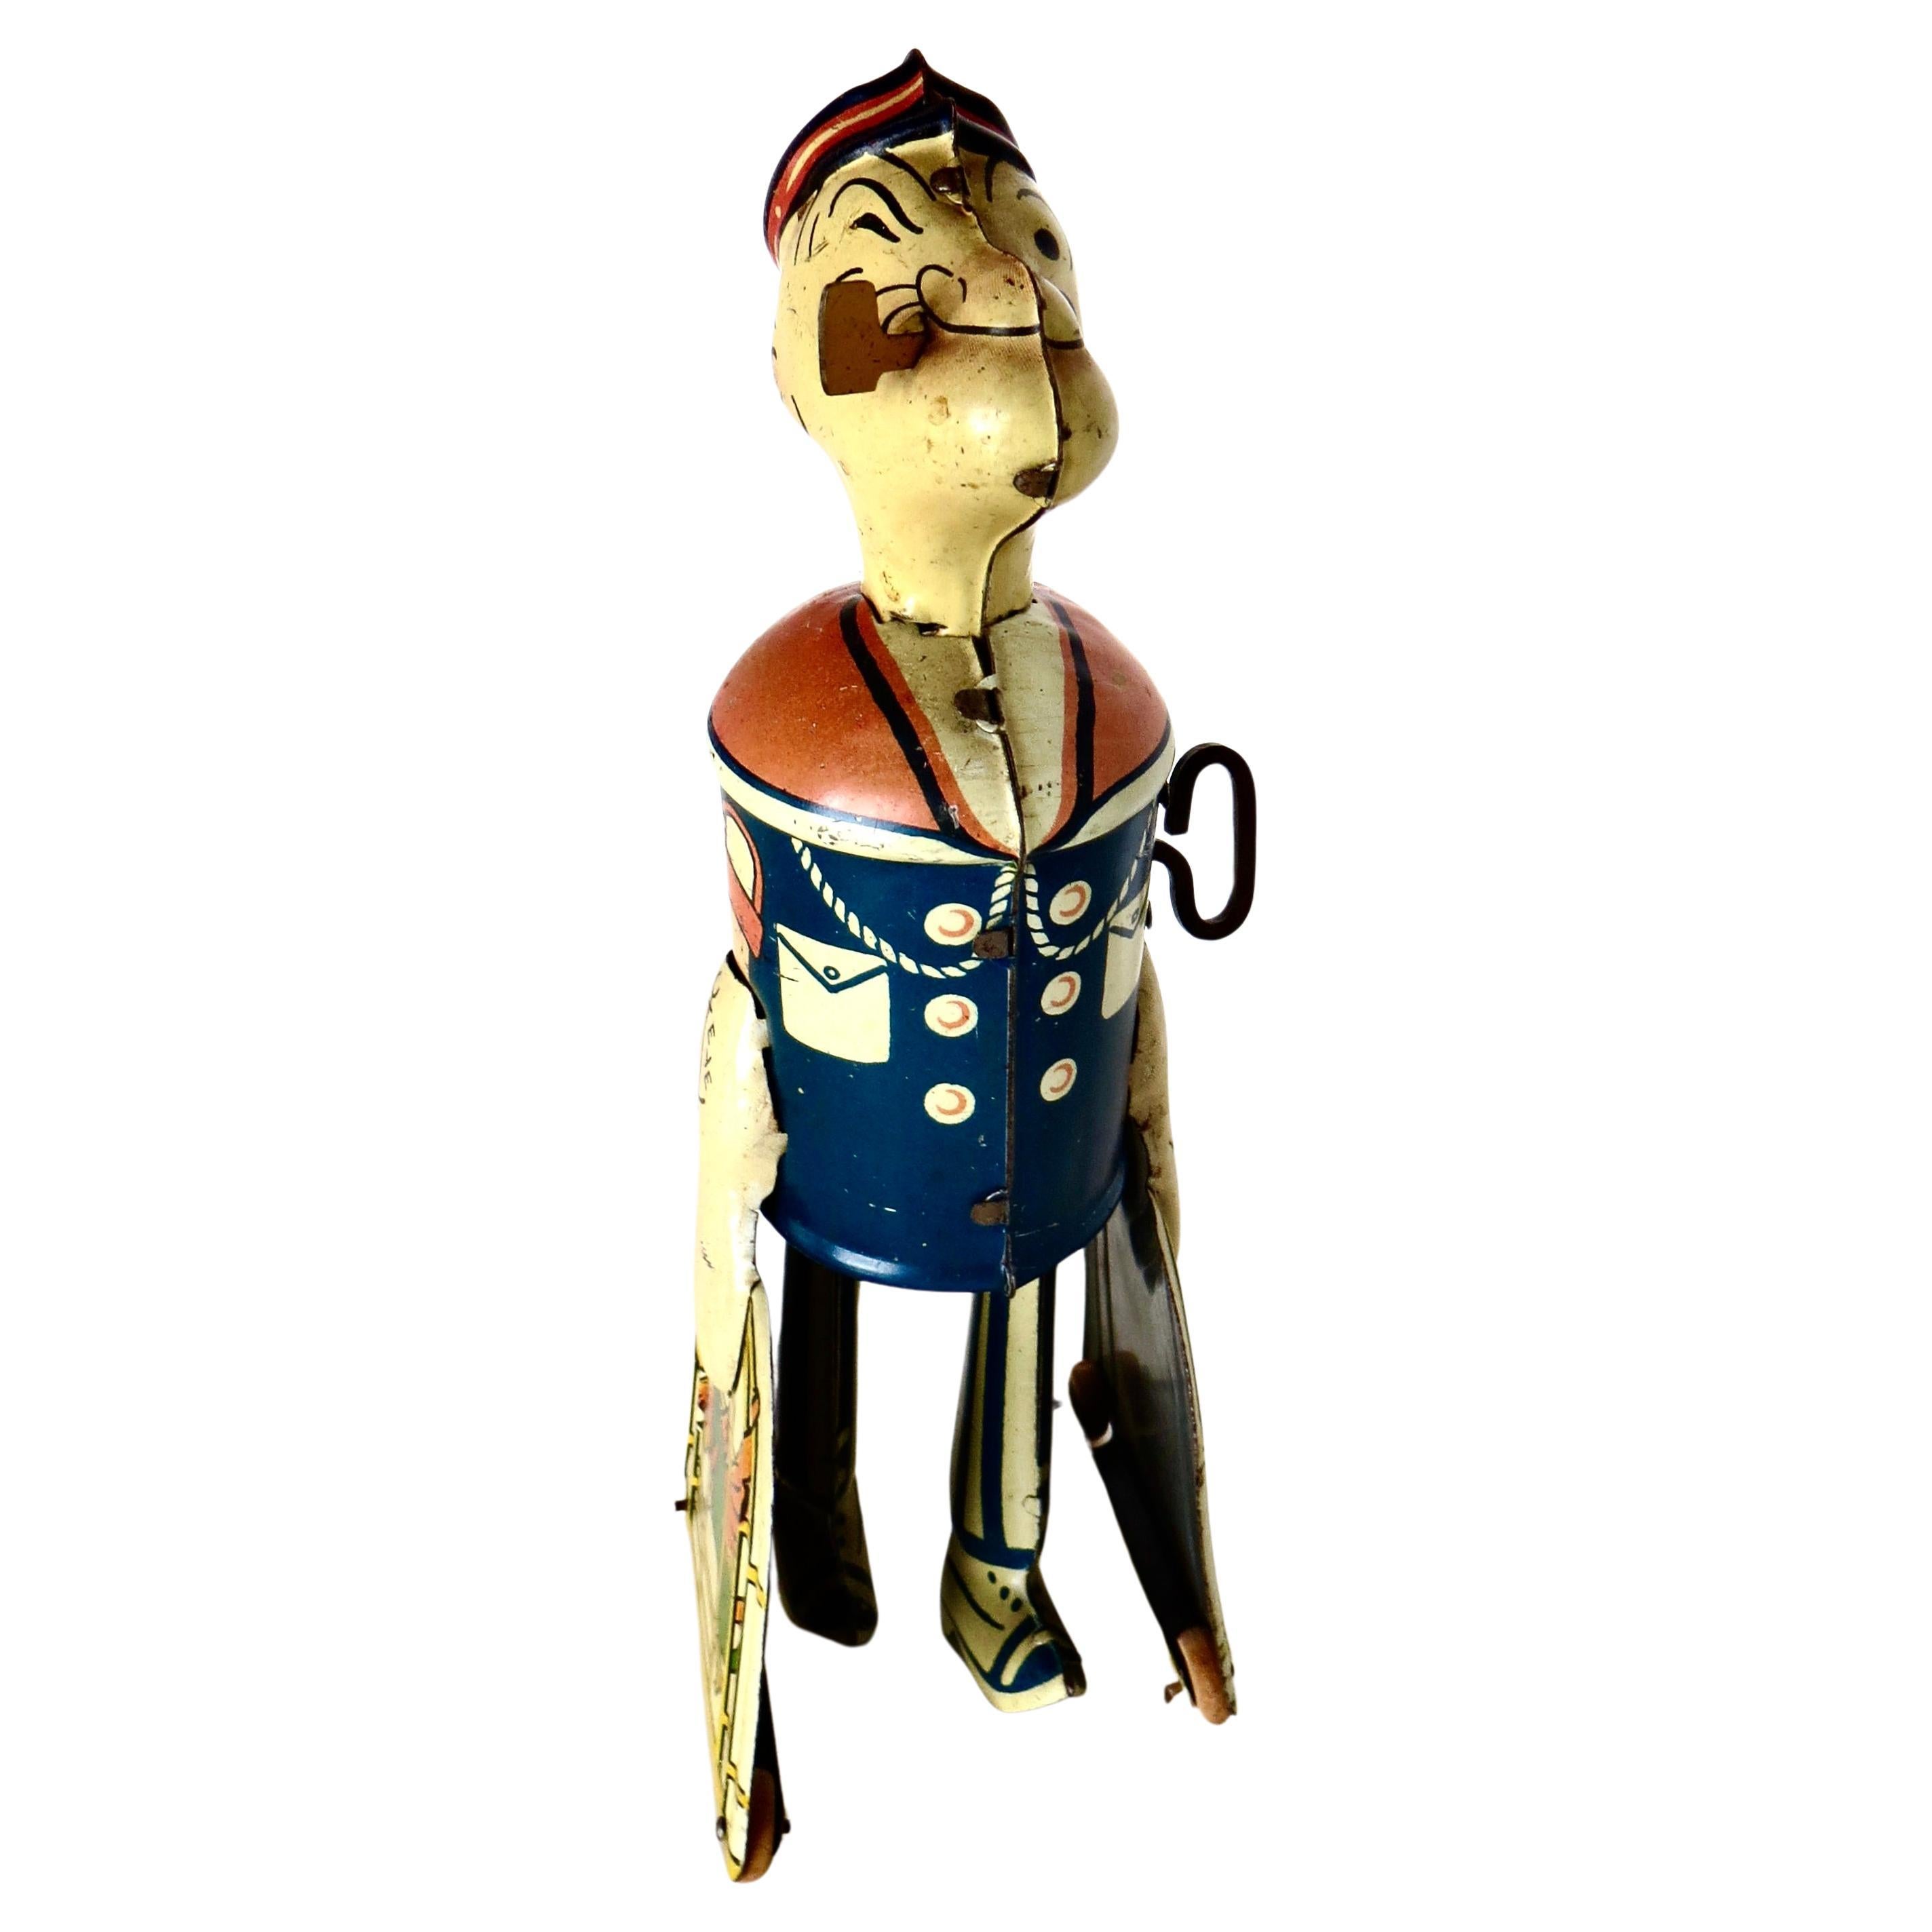 Vintage 1930's wind-up toy by the Marx Toy Company of New York, portraying the iconic comic character, 